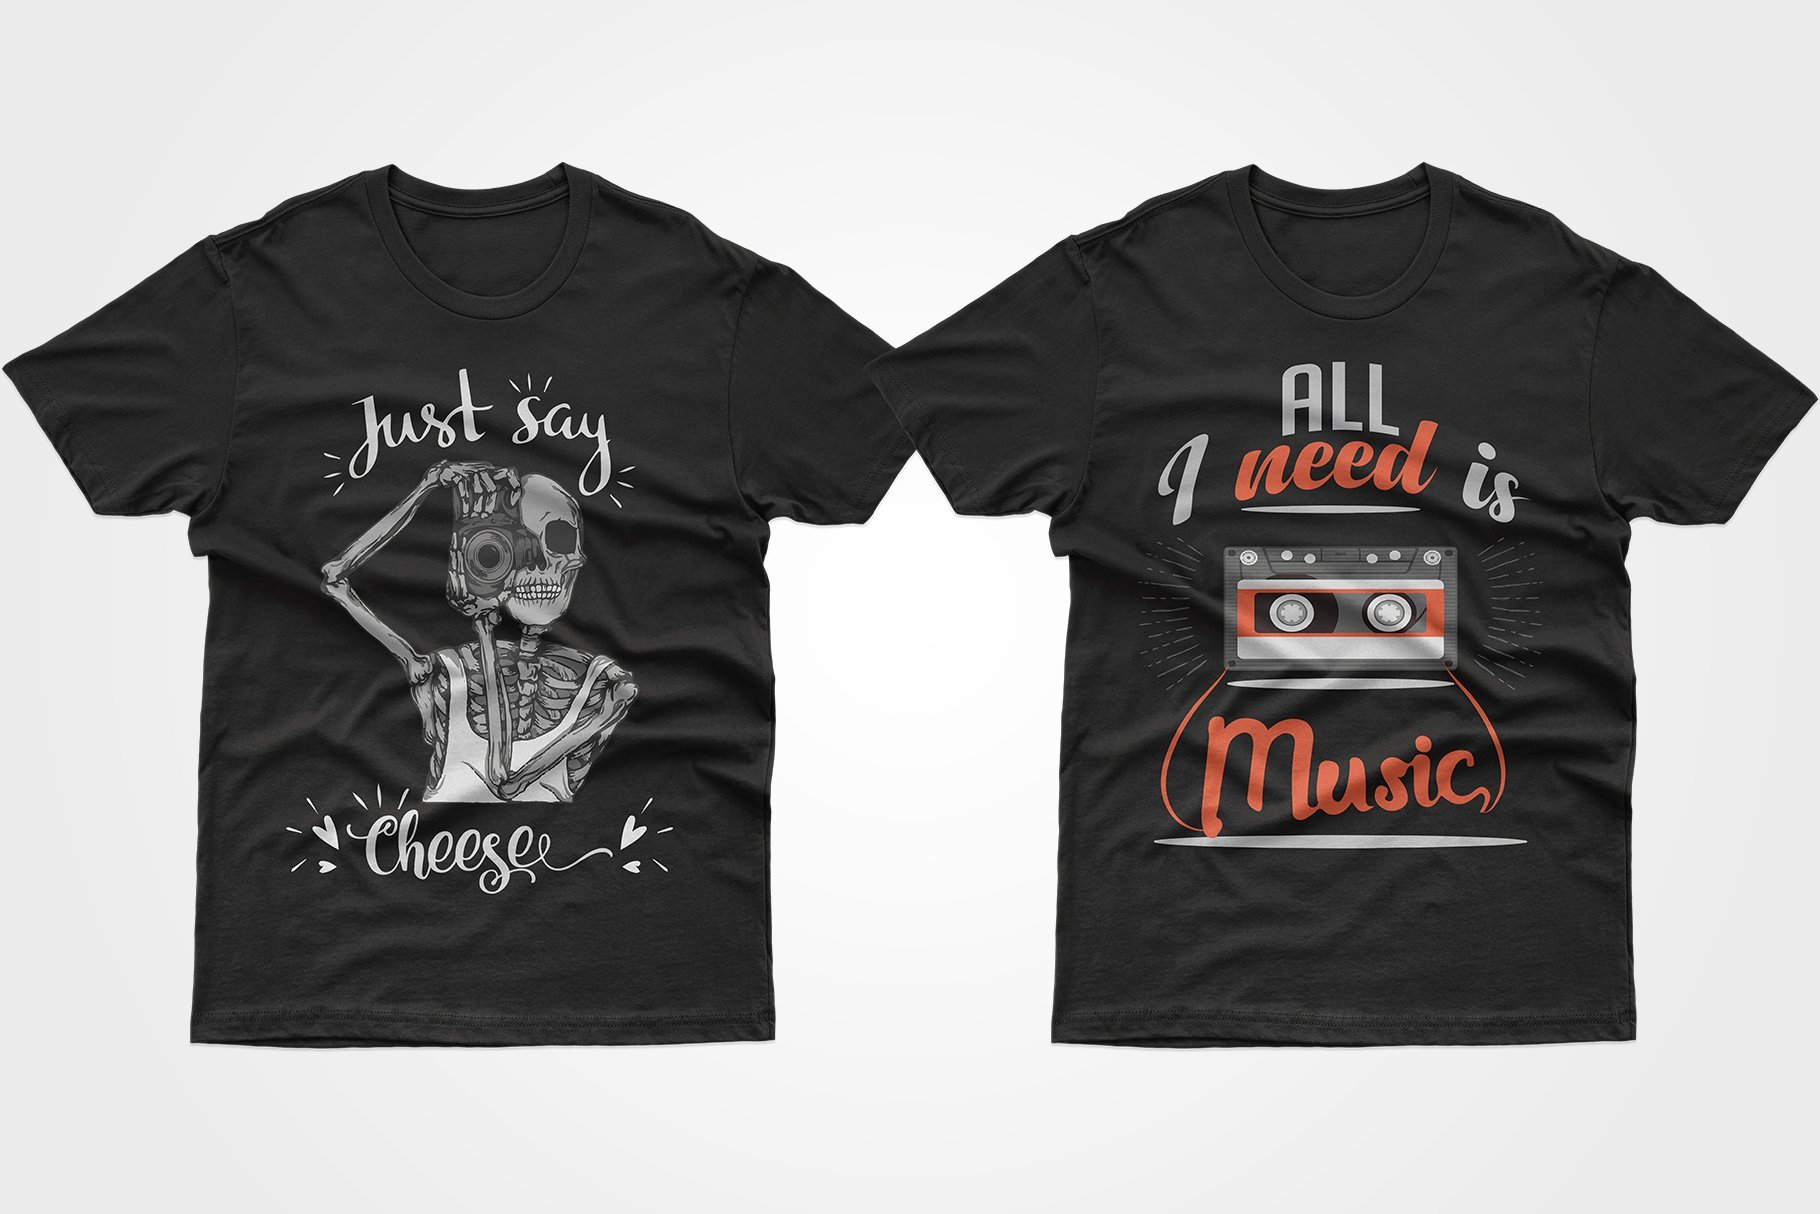 Two black T-shirts - one with a photographic skeleton, the other with a music cassette.